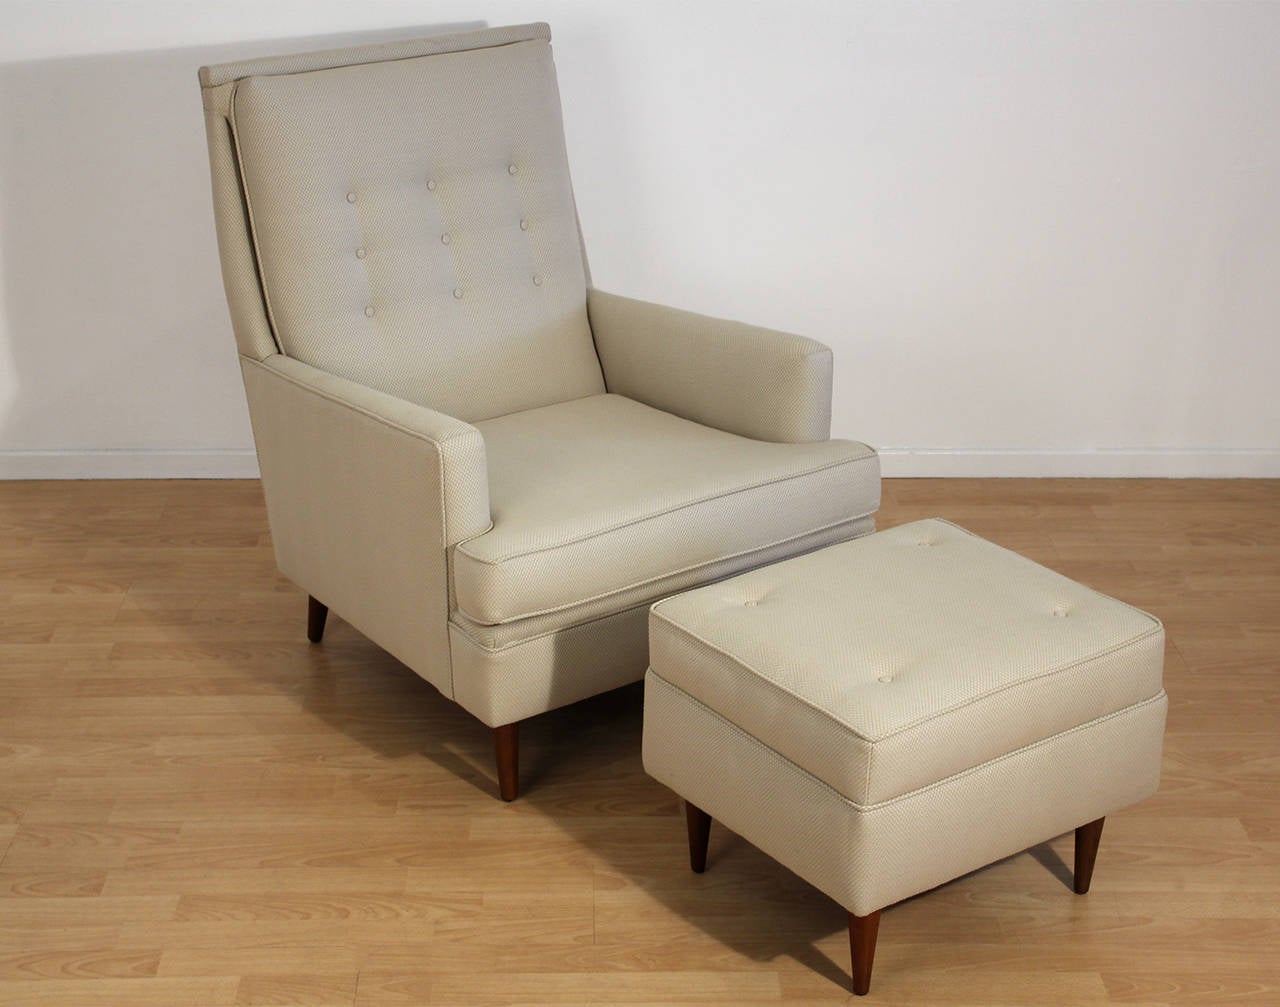 American Mid-Century Modern Lounge Chair and Ottoman Attributed to Paul McCobb